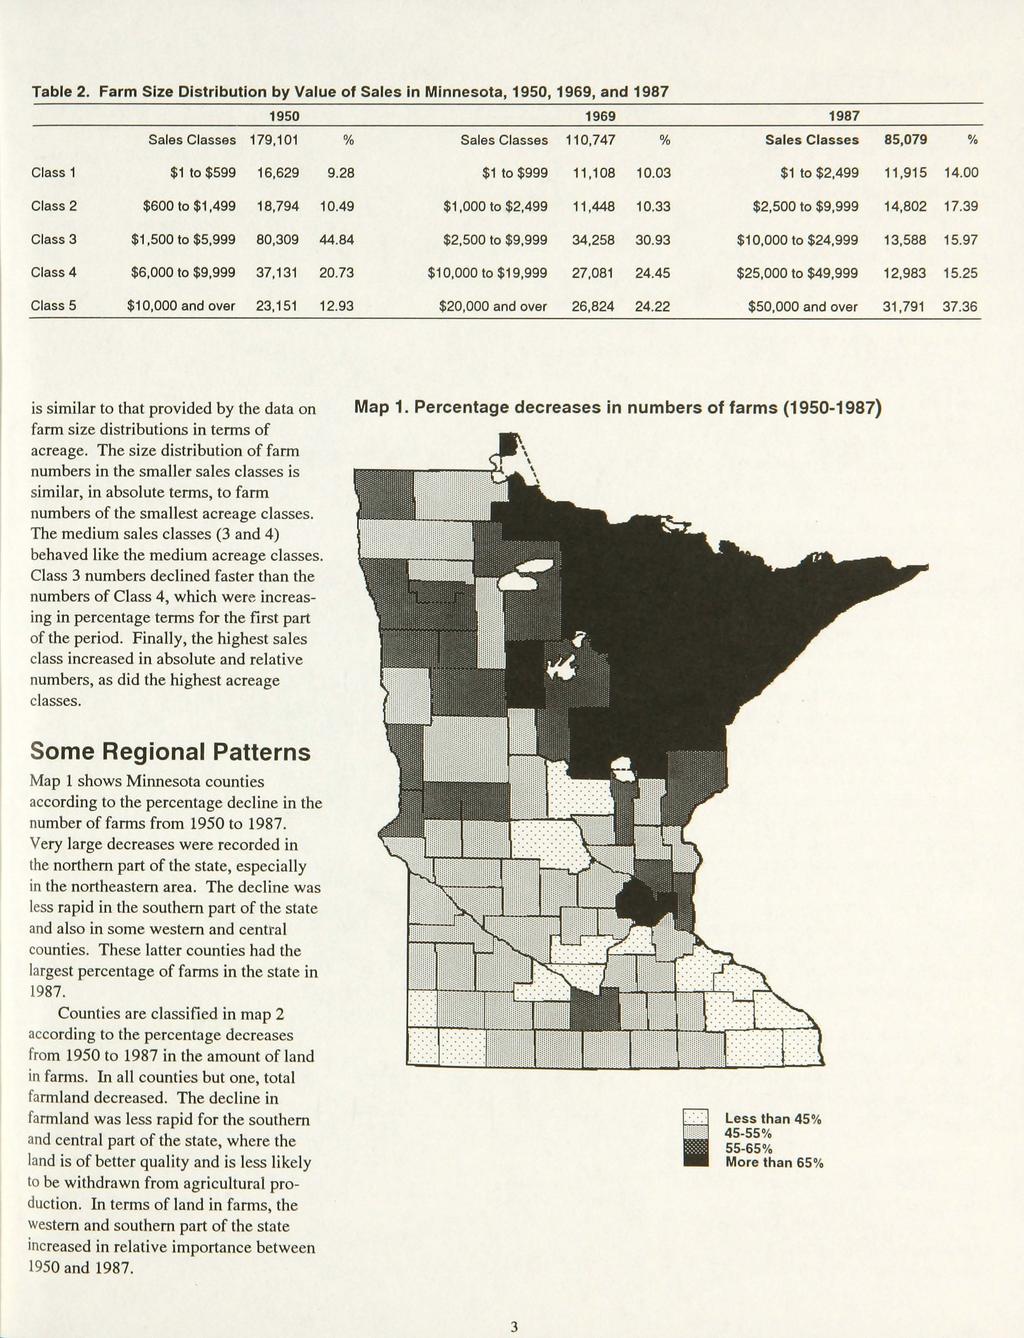 Table 2. Farm Size Distribution by Value of Sales in Minnesota, 1950, 1969, and 1987 1950 Sales Classes 179,101 % Class 1 $1 to $599 16,629 9.28 Class 2 $600 to $1,499 18,794 10.